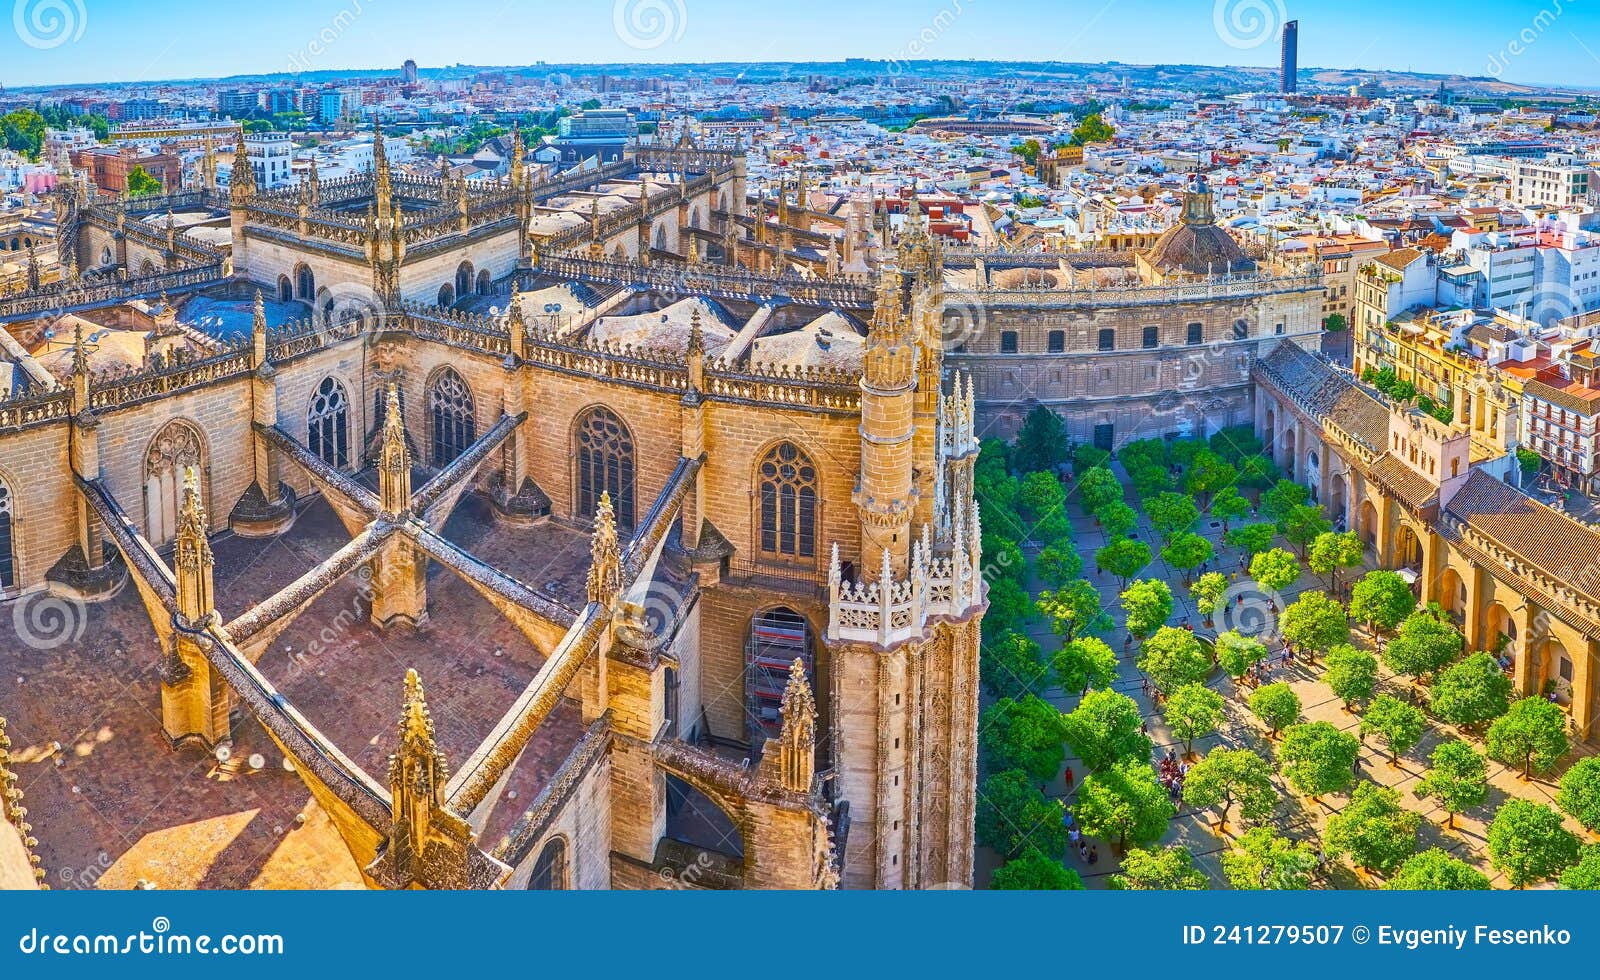 panorama with roof of gothic seville cathedral, orange trees garden and casco antiguo, spain